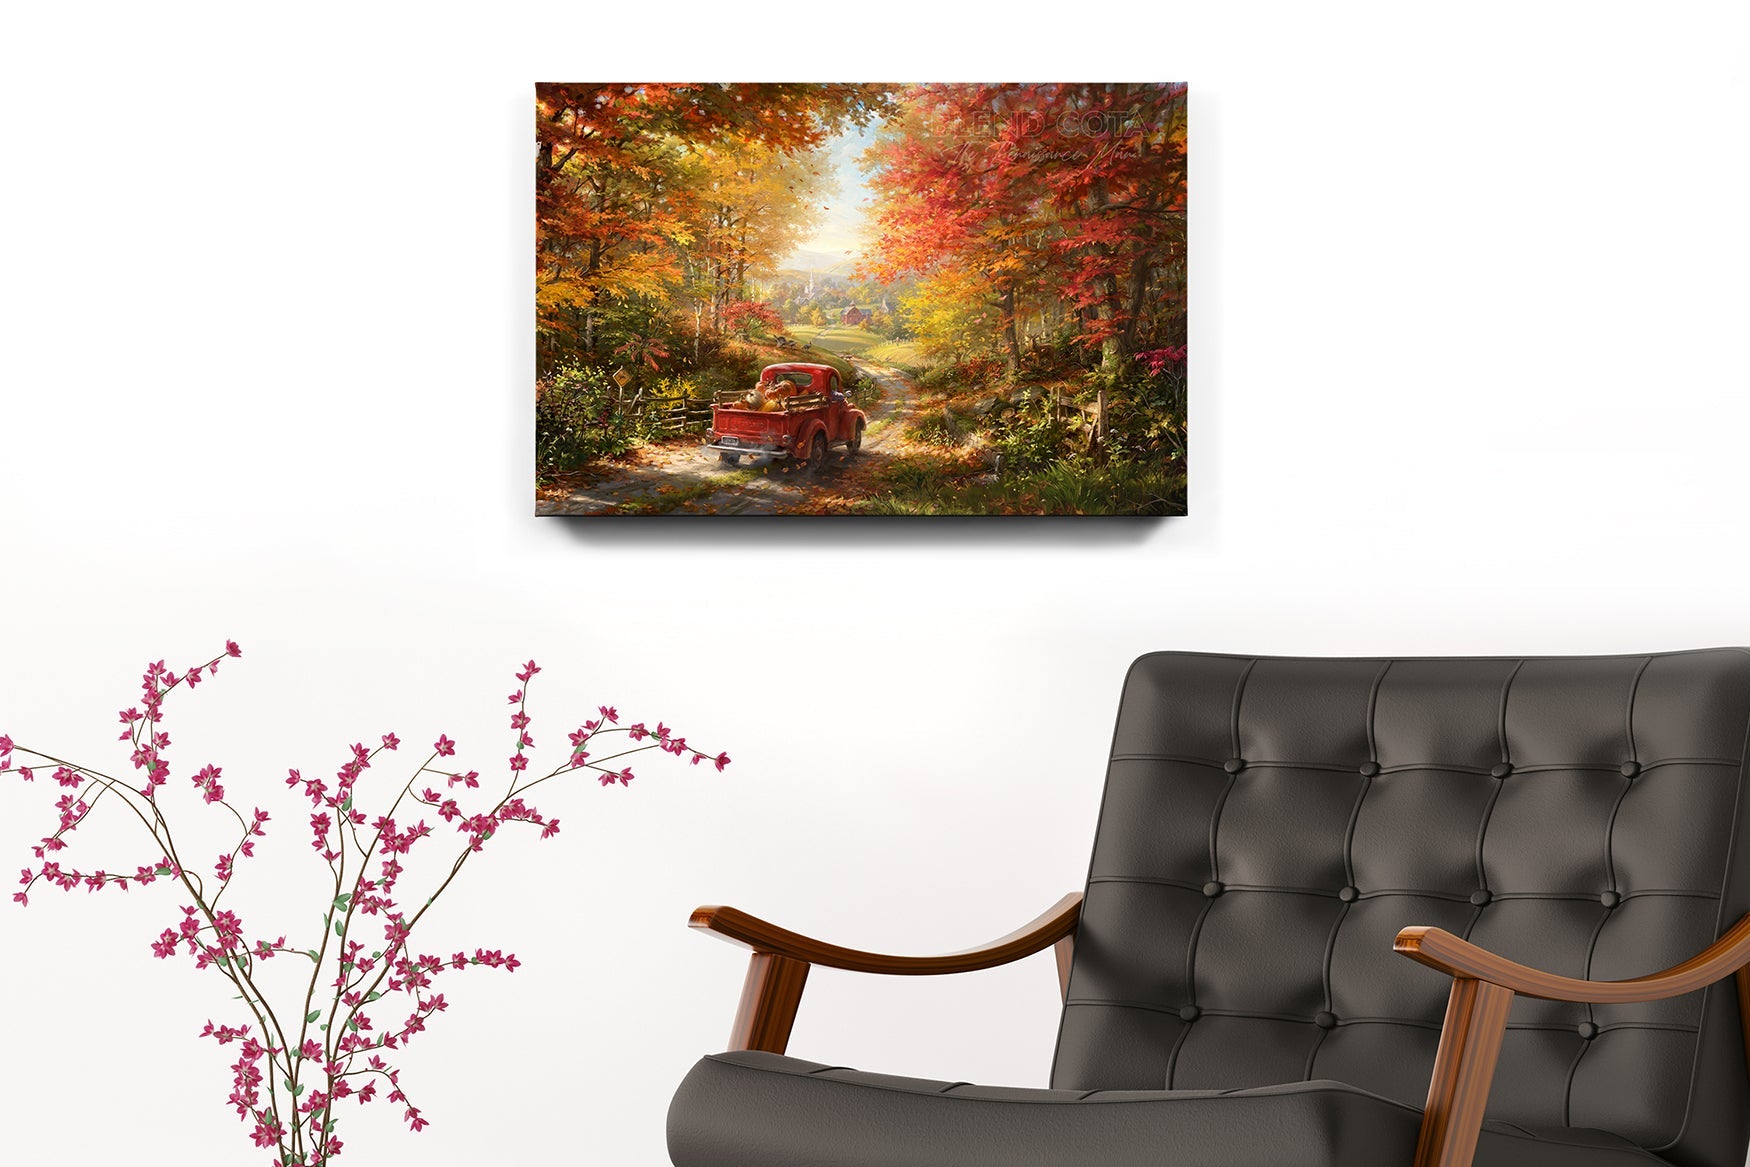 The Place I Belong | Fall Road Autumn Leaves - Blend Cota Art Print on Canvas - Blend Cota Studios - room setting chair with painting hanging on white wall